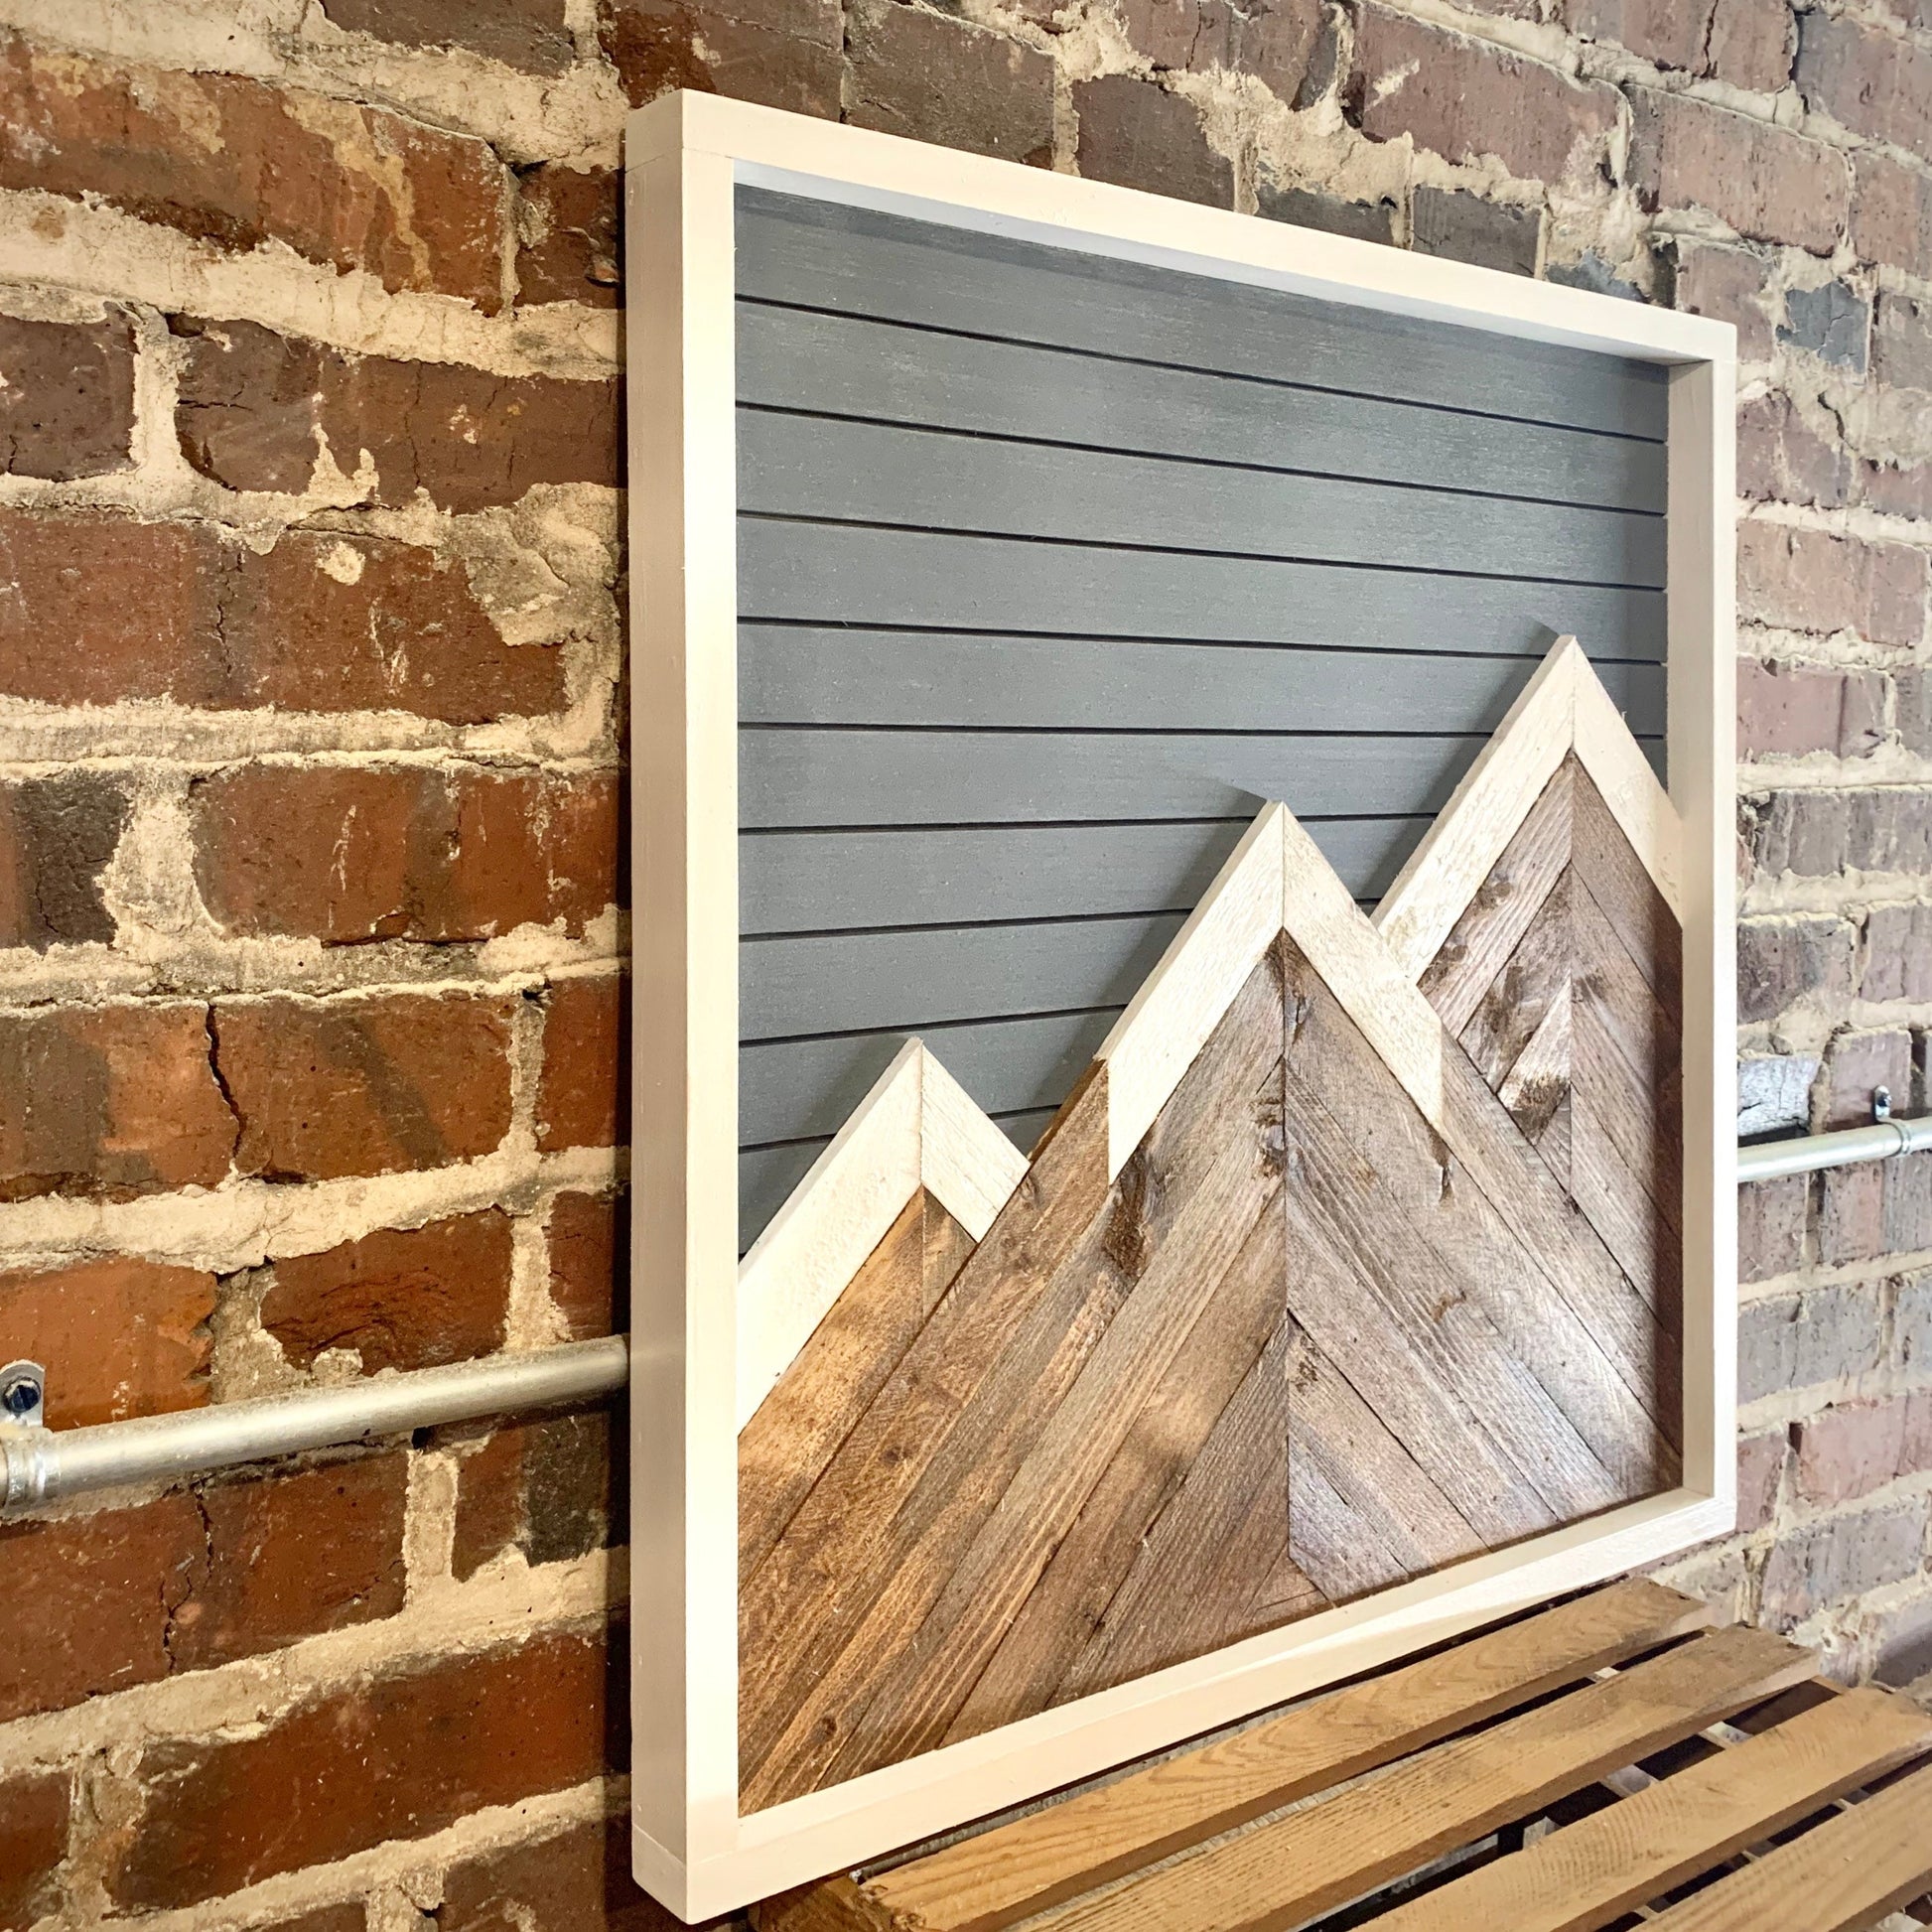 Handmade Wood Mountain Wall Art Brings Great Outdoors Into Any Home